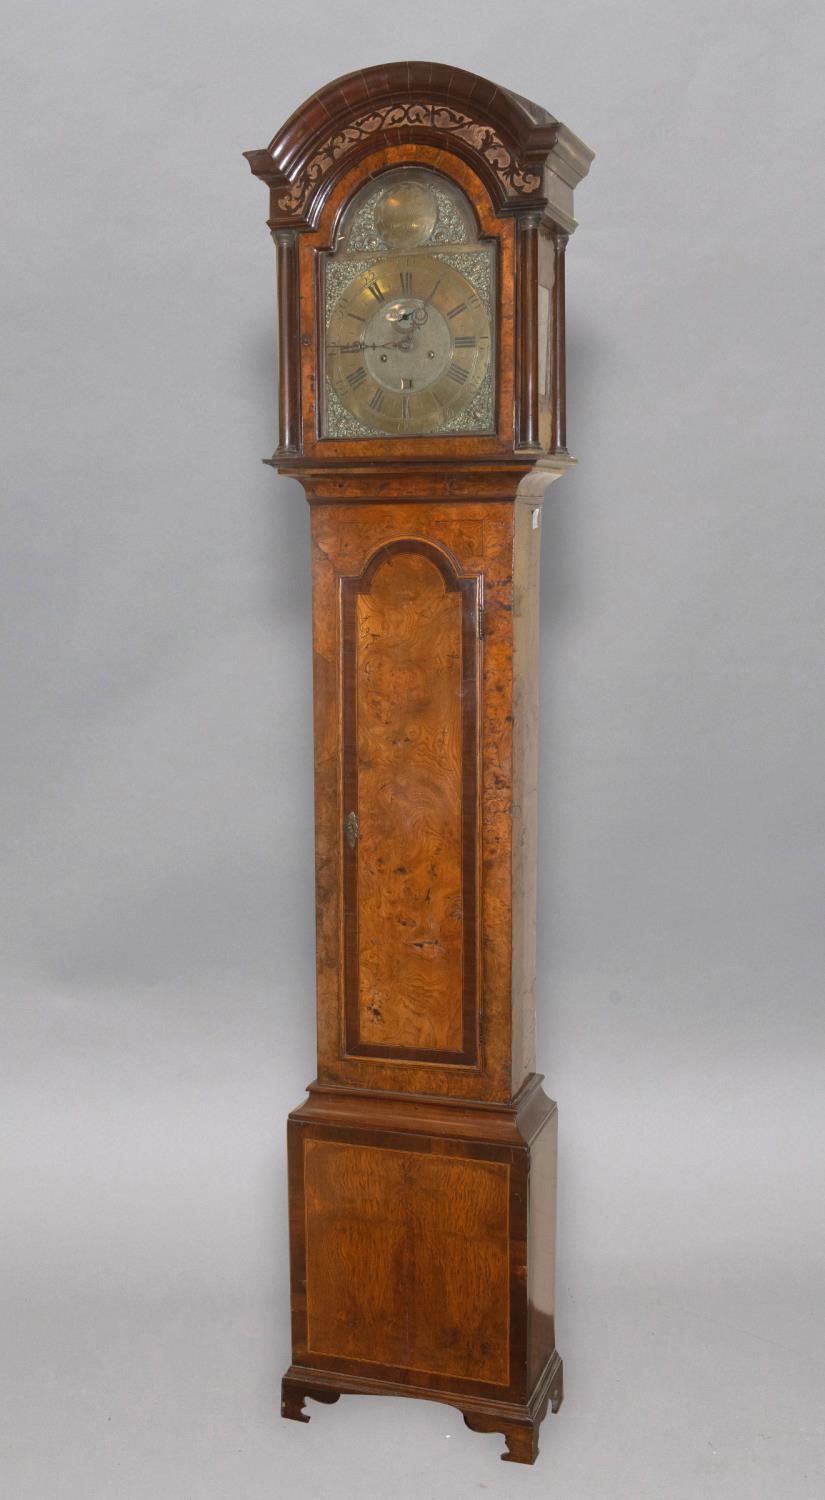 A SCOTTISH BURR ELM LONGCASE CLOCK BY SMITH OF DUNDEE, the brass dial with chapter ring and